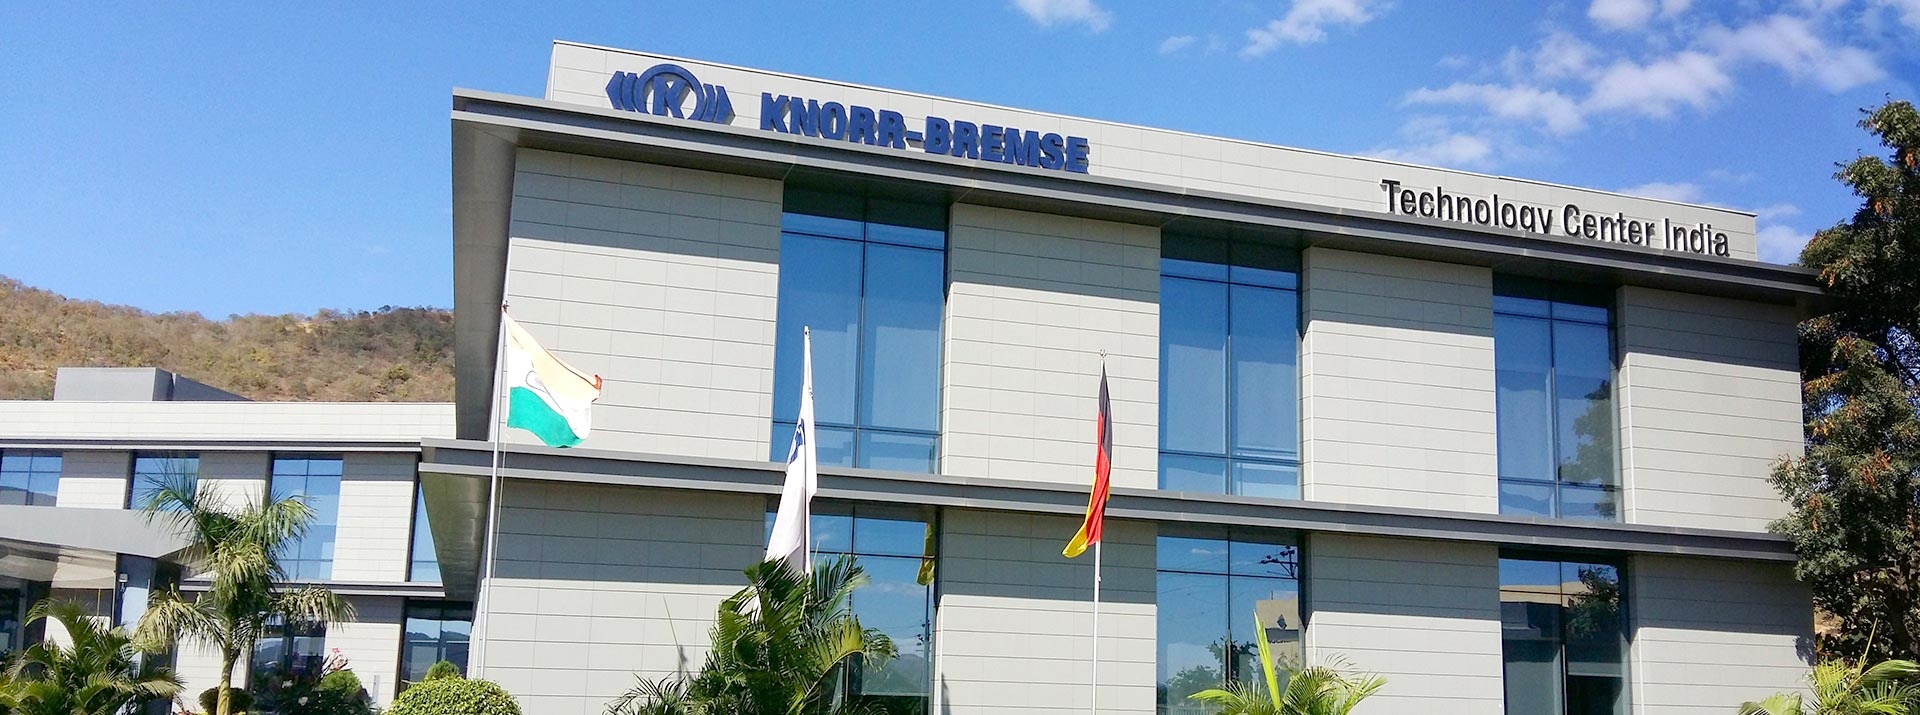 Technology Center India building at the Indian site in Pune. In the foreground palm trees and three flags, at the top of the building the Knorr-Bremse logo and the words "Technology Center India".